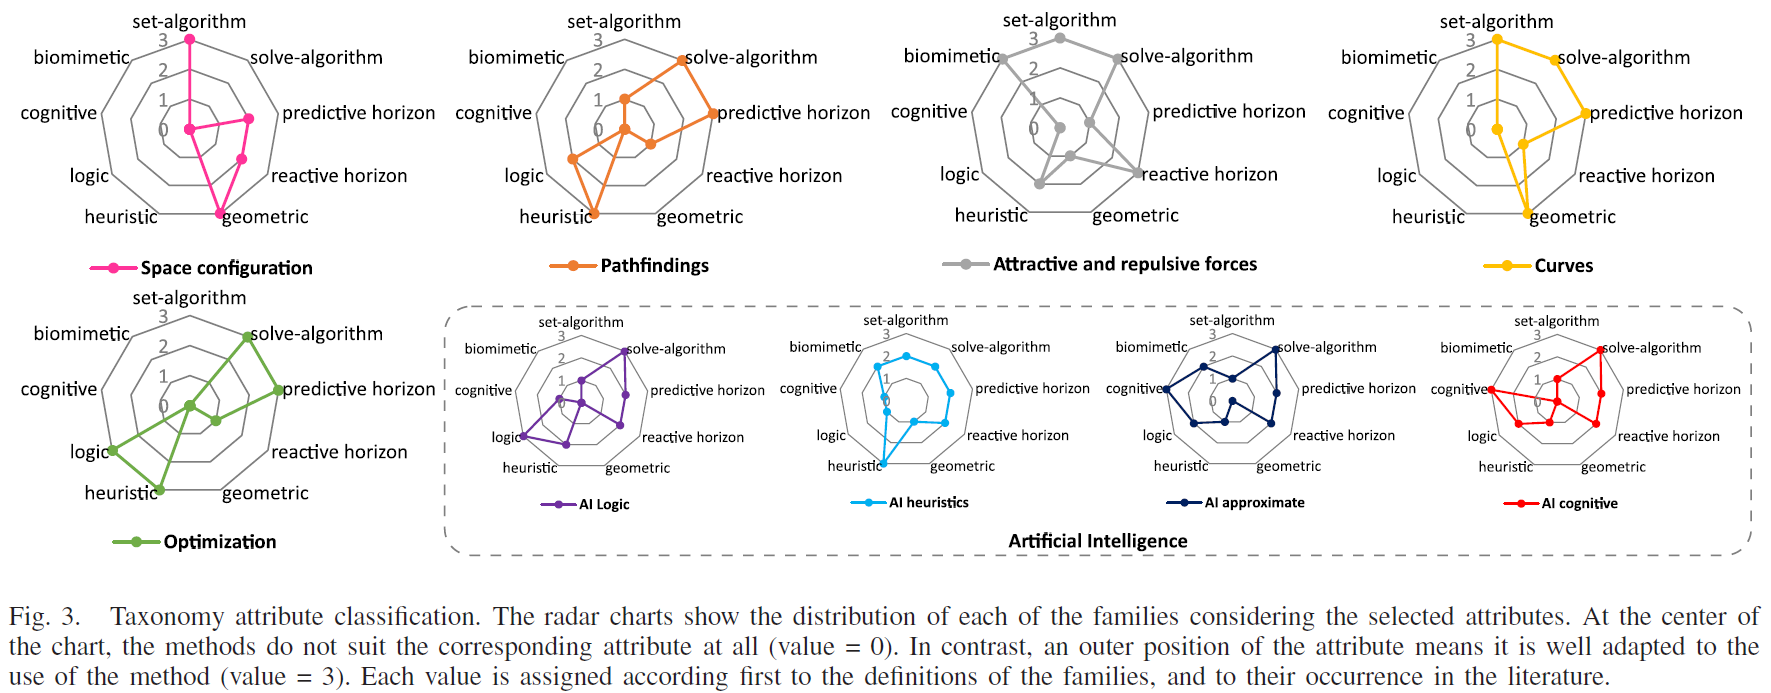 Contrary to solve-algorithms methods, set-algorithm methods require a complementary algorithm should be added to find the feasible motion. Depending on the importance of the generation (iv) and deformation (v) part, approaches are more or less reactive or predictive. Finally, based on their work on AI-based algorithms, the authors define four subfamilies to compare to human: logic, heuristic, approximate reasoning, and human-like. Source.